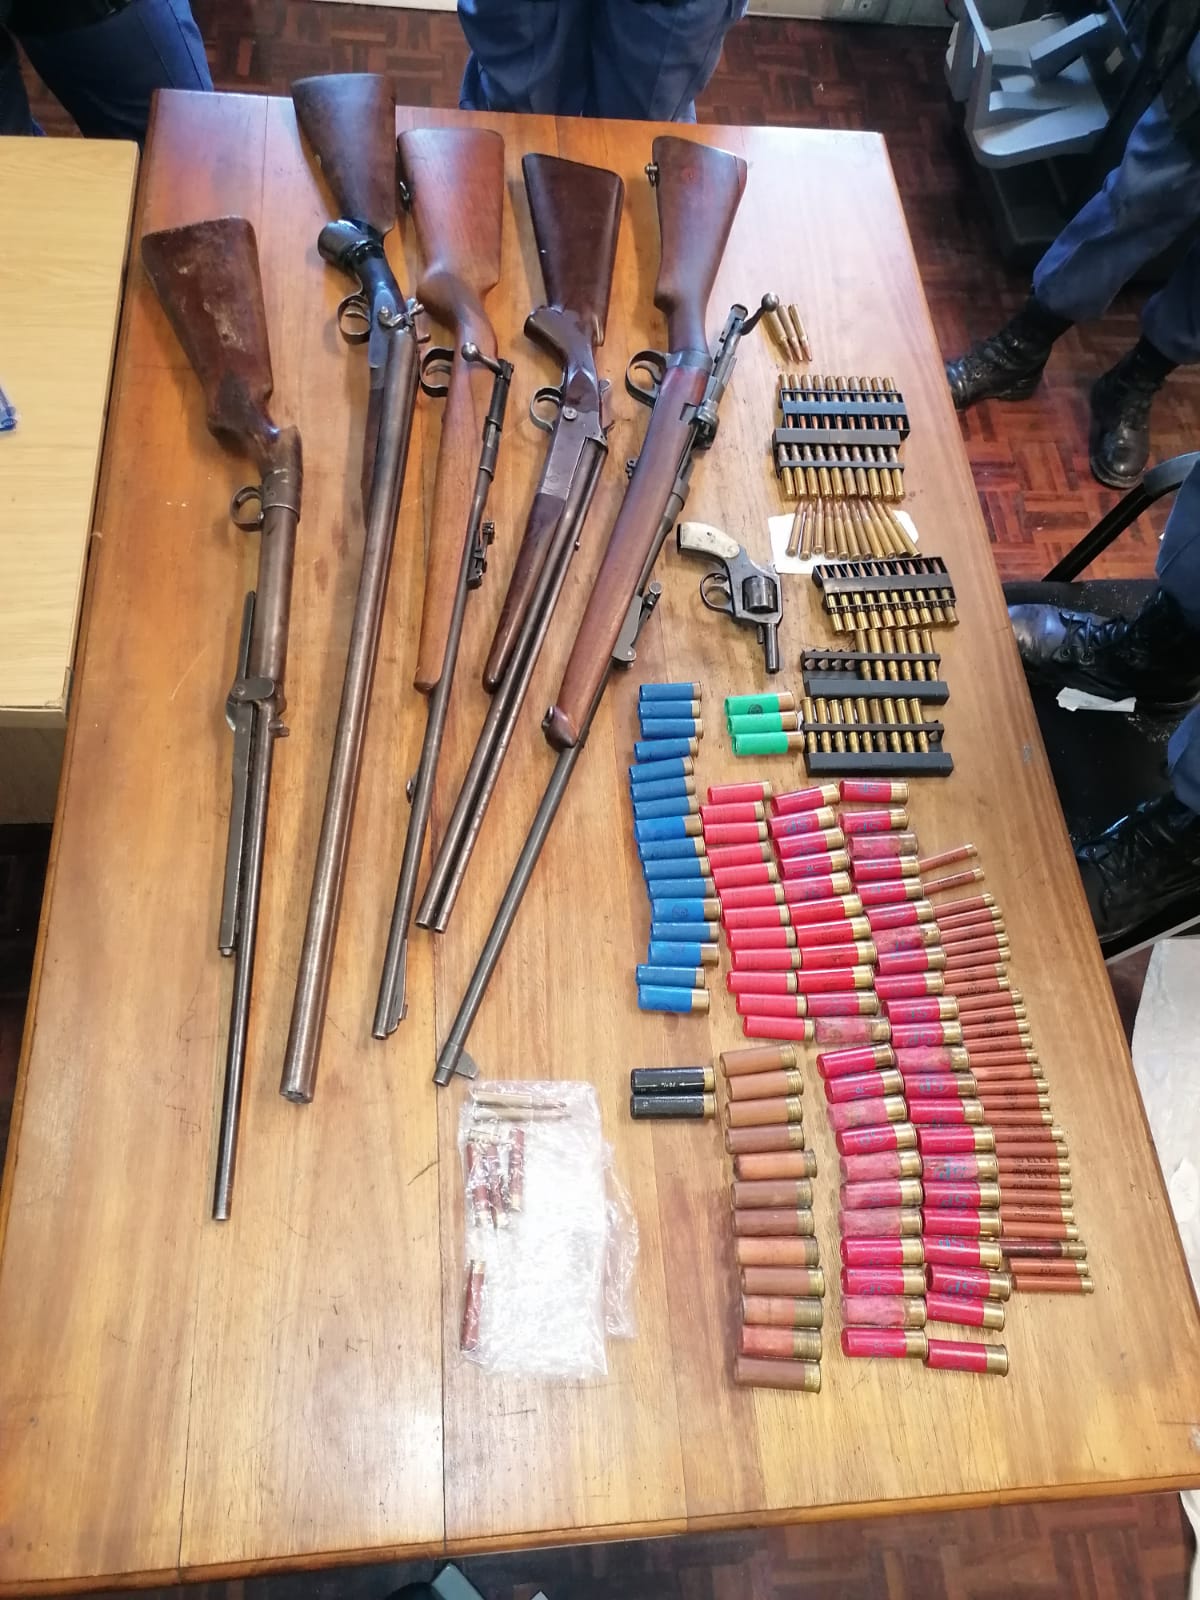 Unlicensed firearms recovered in Grabouw and Worcester